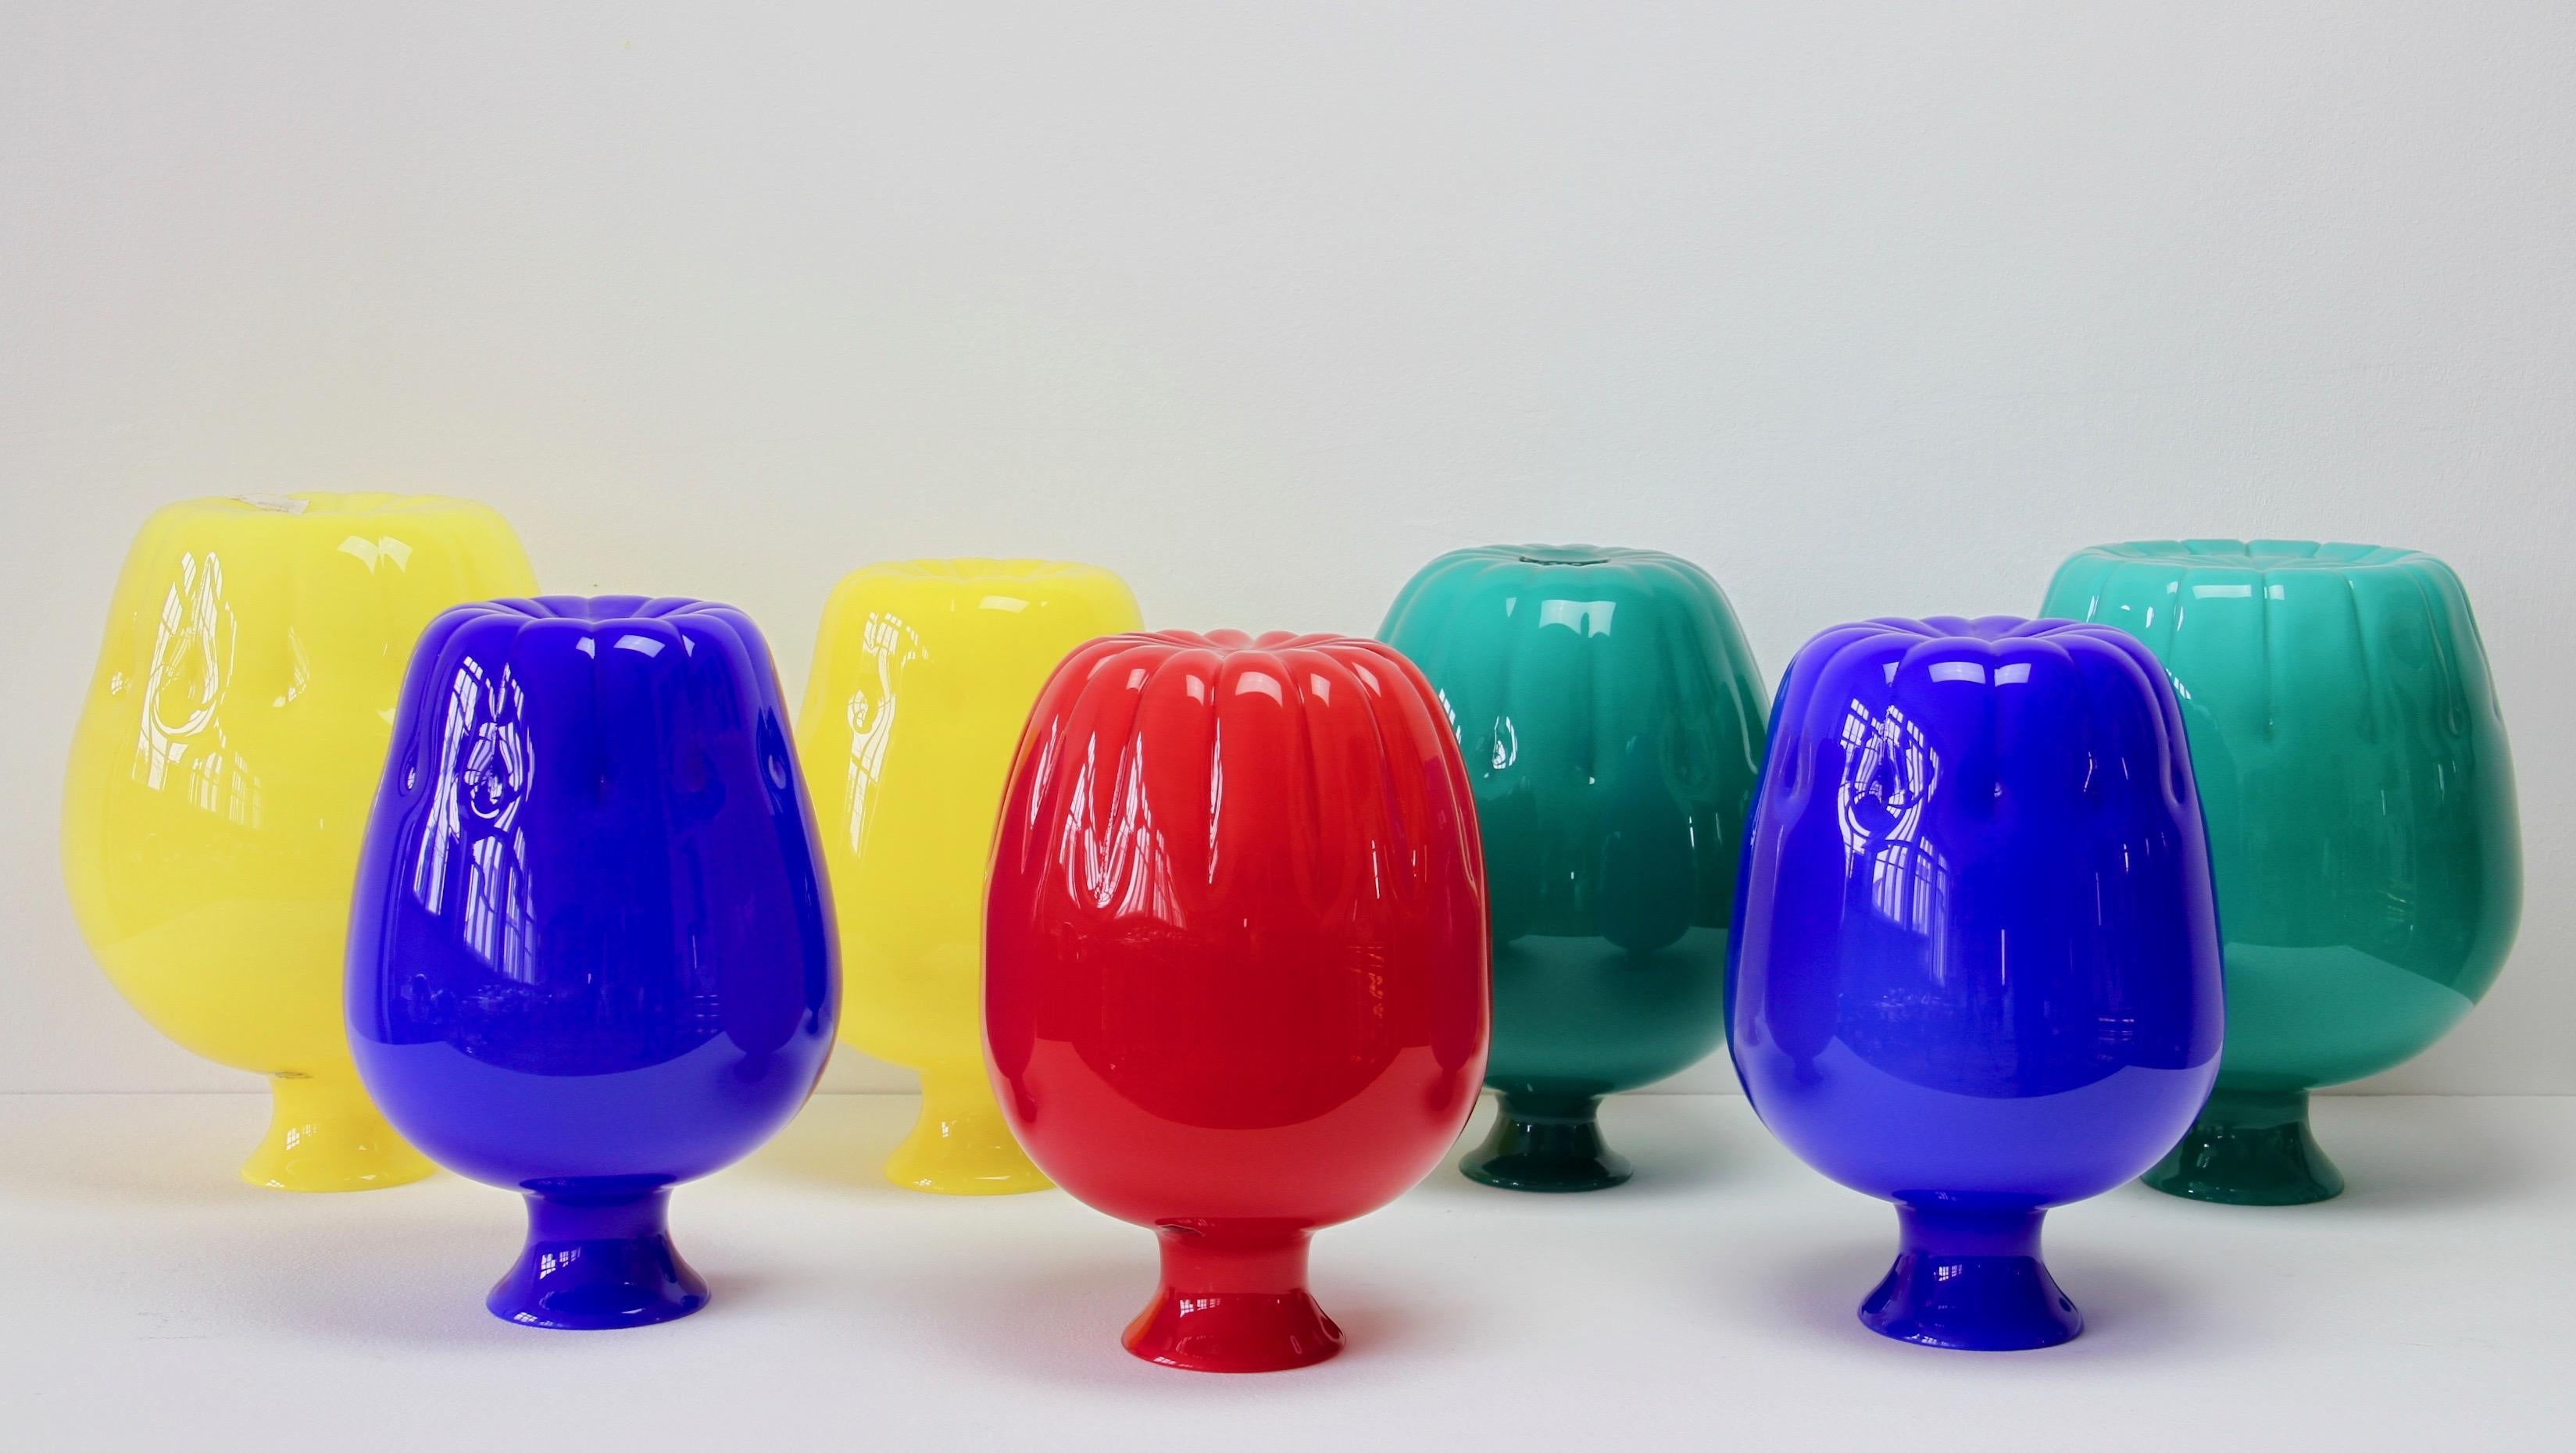 Blown Glass Colorful Cenedese Set of Red, Blue, Green & Yellow Vintage Italian Murano Vases